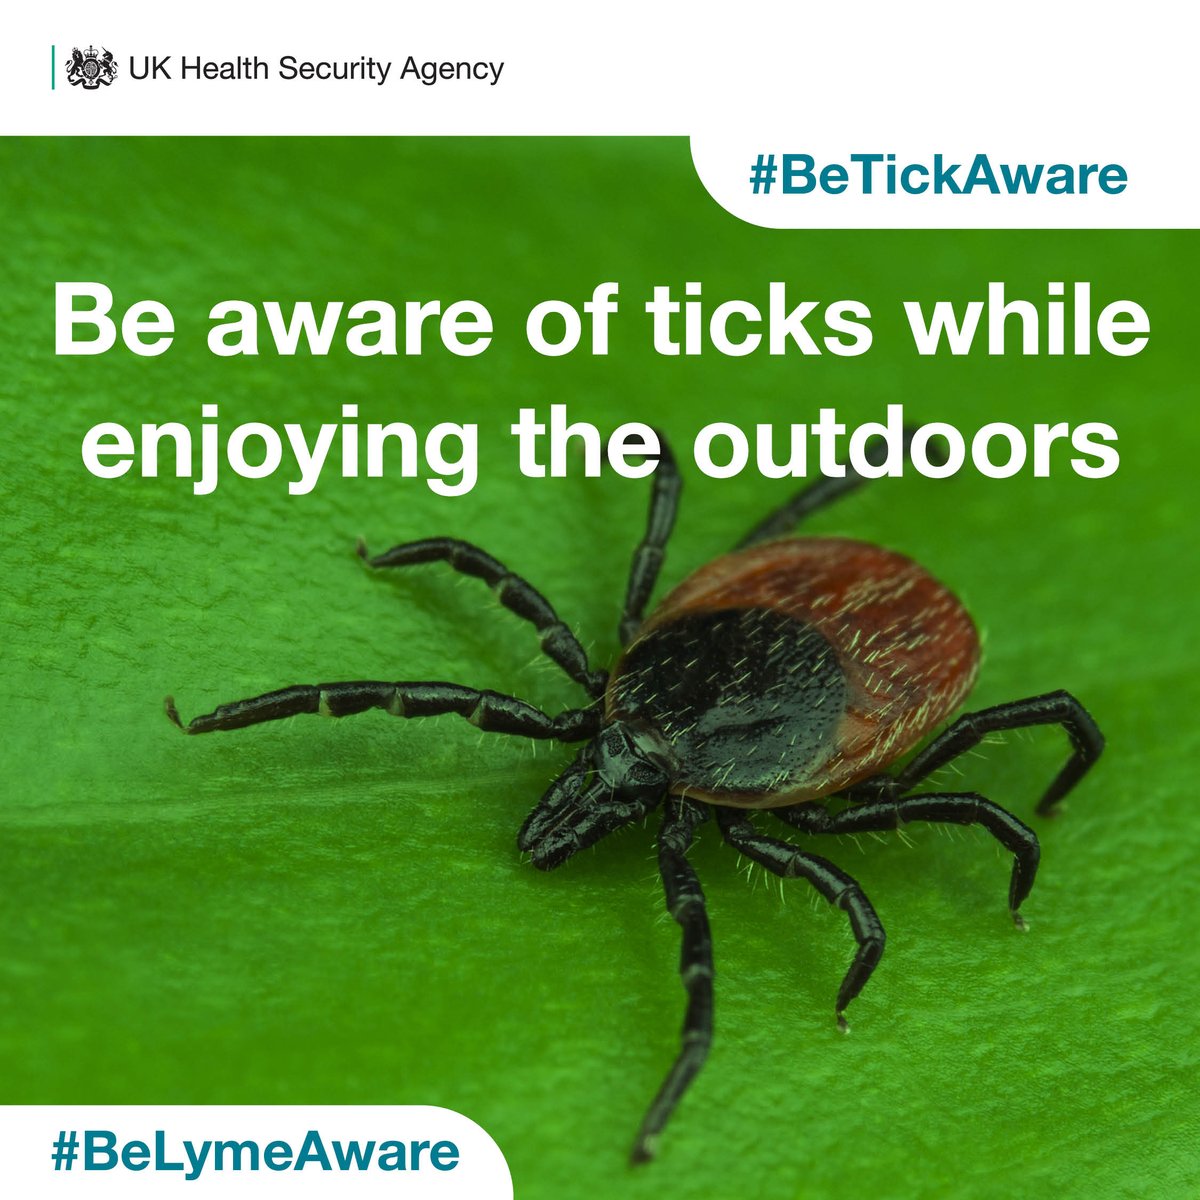 As we head into spring and summer we are reminding people to be ‘tick aware’ as they enjoy the great outdoors.
To help you stay safe this spring and summer, UKHSA have compiled a guide to protecting yourself from tick-borne infections.
#BeLymeAware
#BeTickAware
@Lymenews